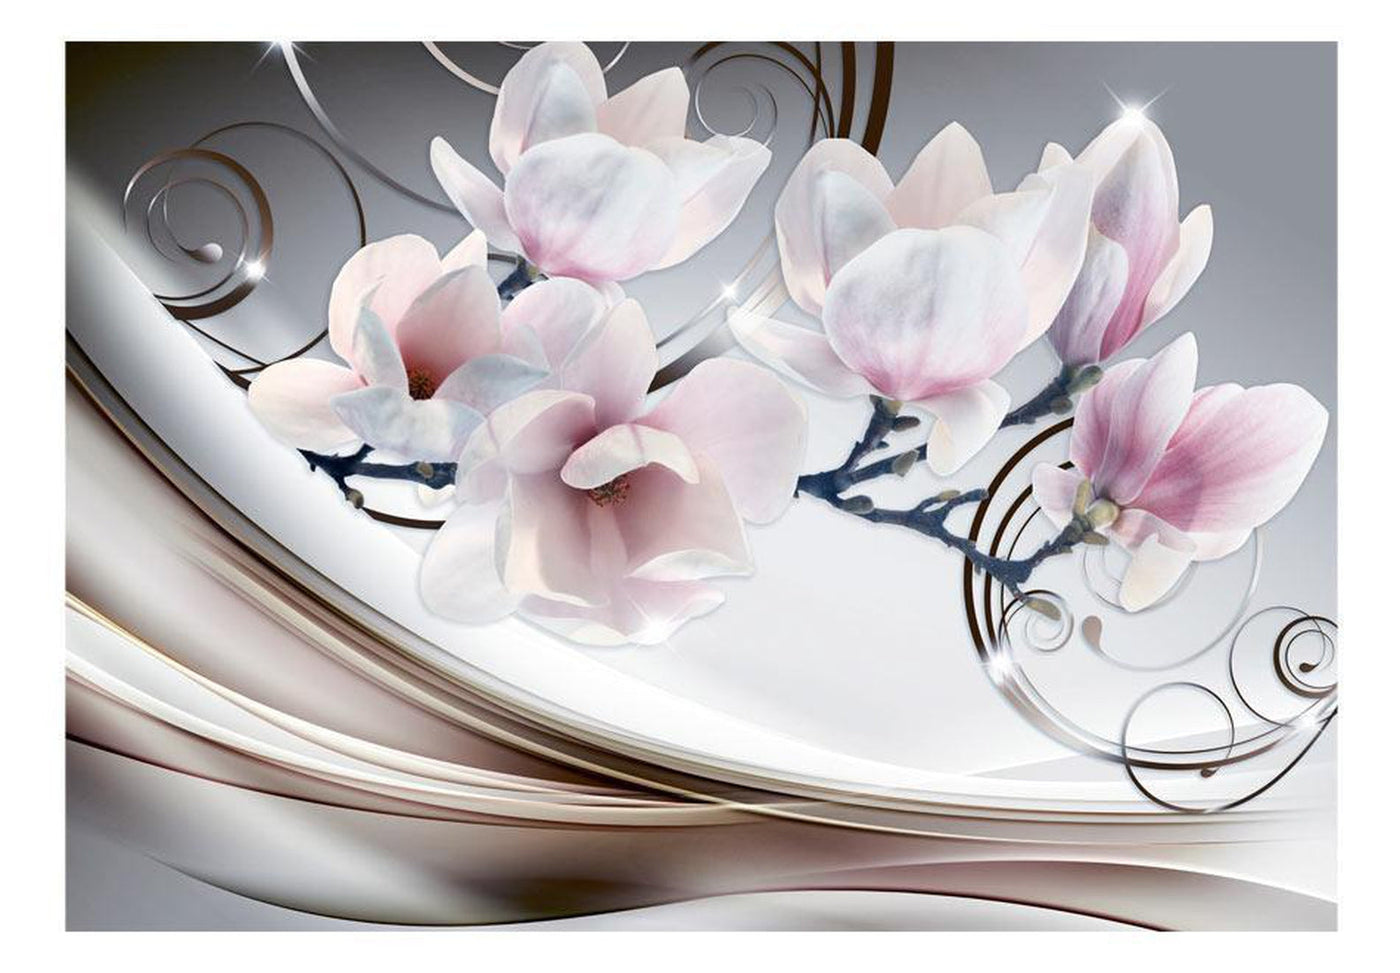 Peel and stick wall mural - Beauty of Magnolia-TipTopHomeDecor